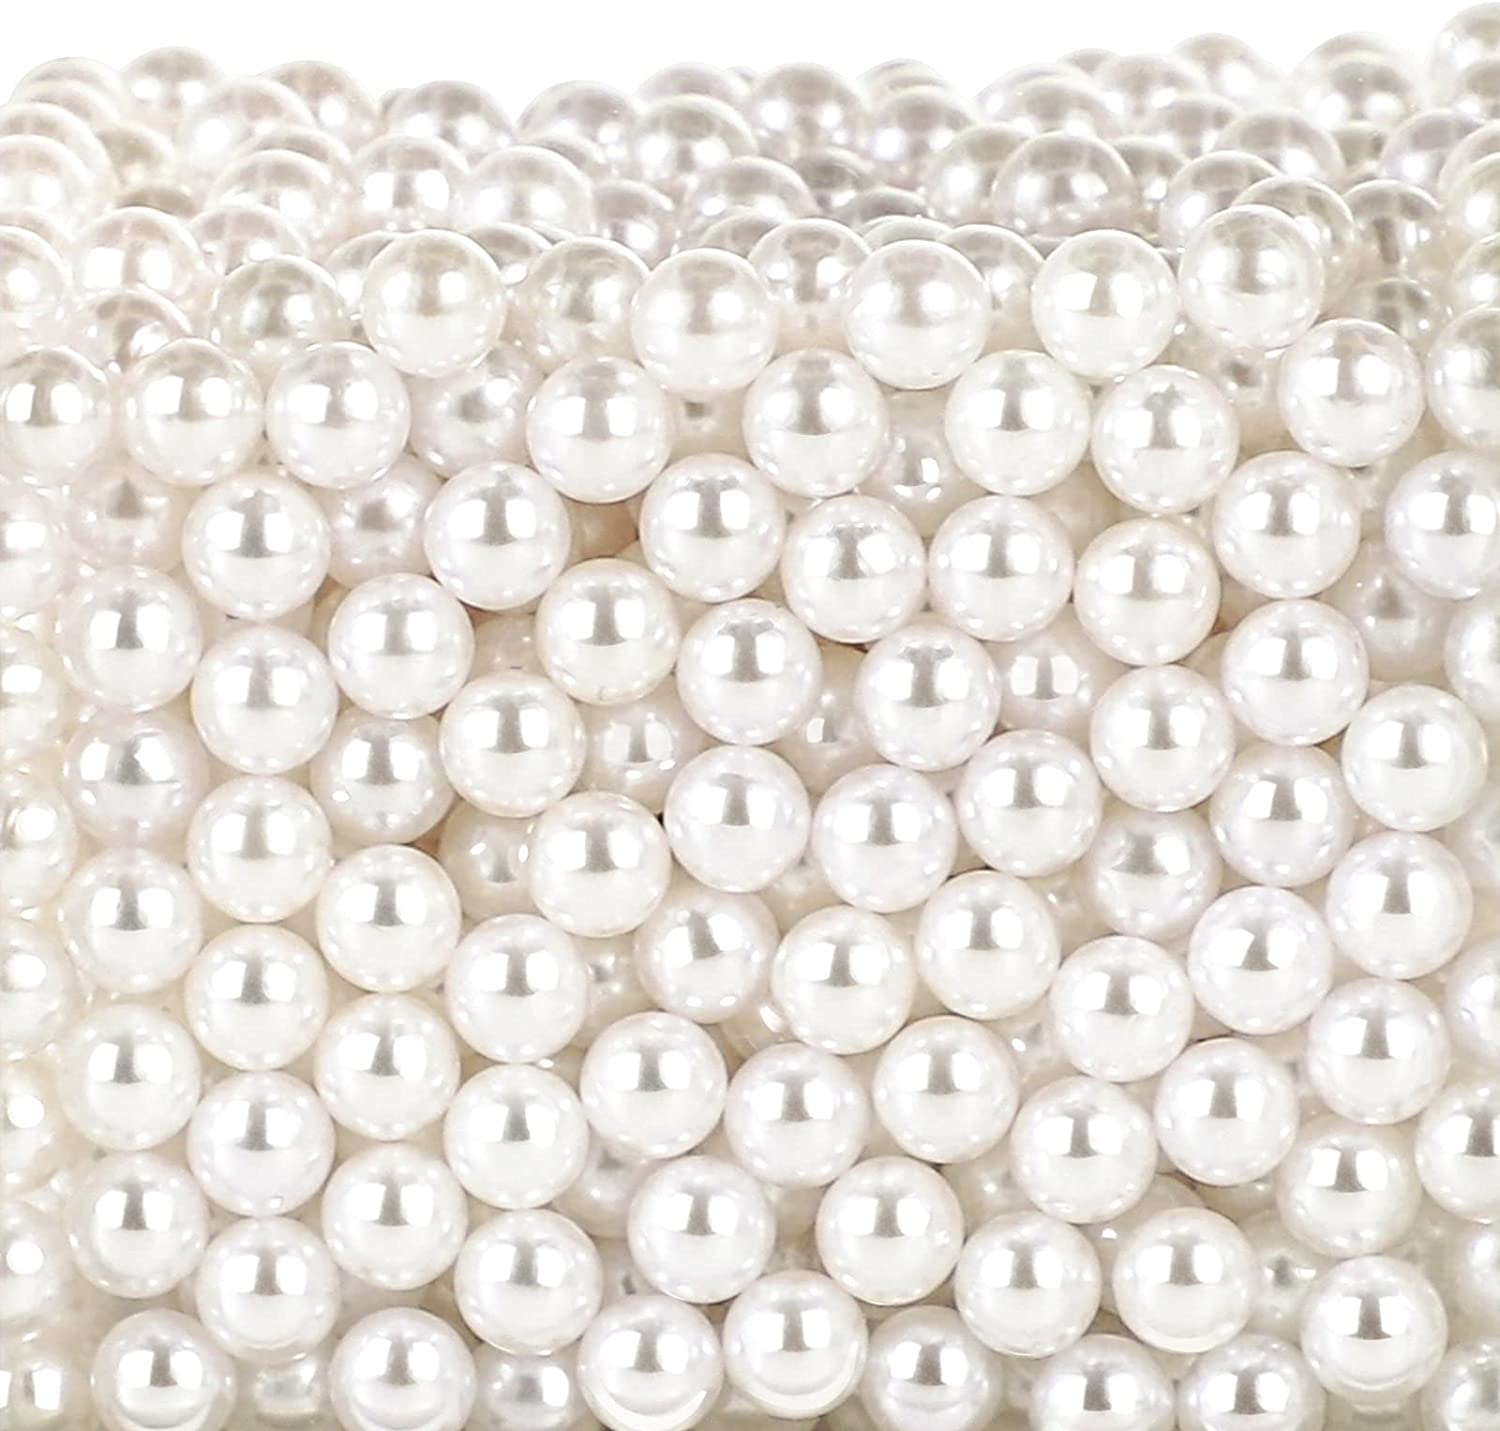 Phinus 1950 Pcs Pearl Beads with Hole, 5 Size Pearls for Crafts, Round Loose Pearl Beads for Jewelry Making, Pearls for Jewelry Making, Decoration